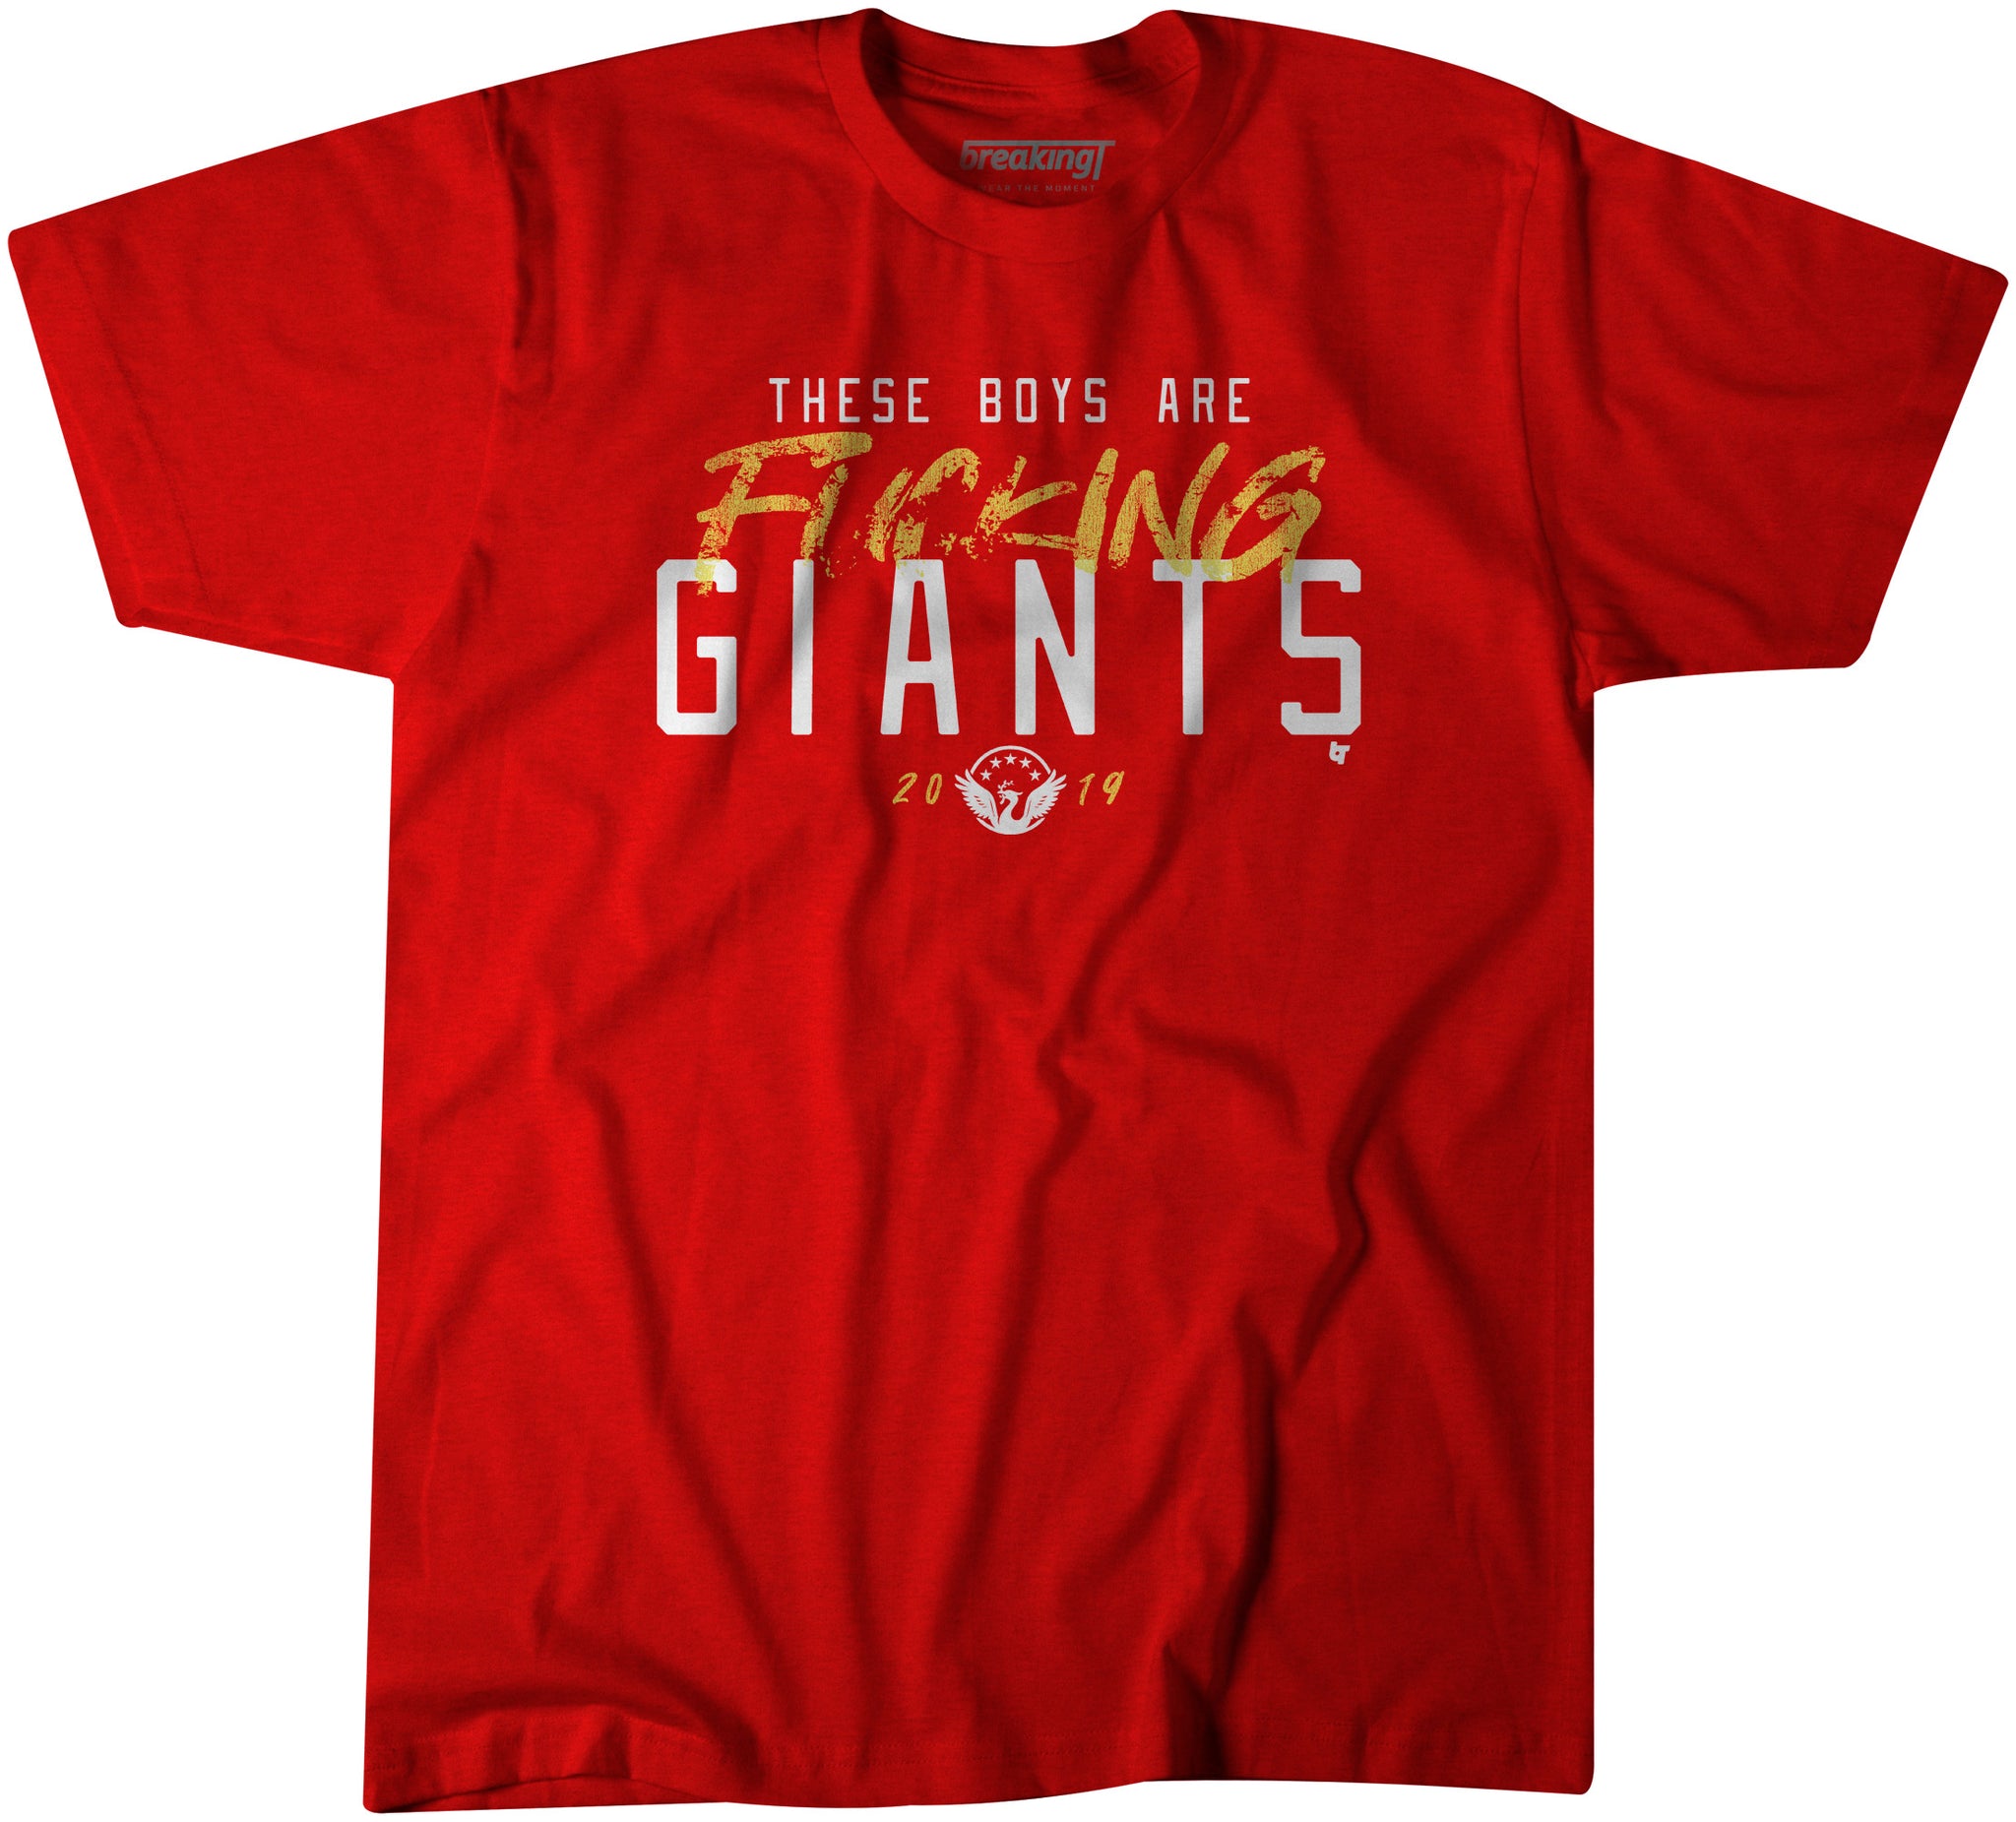 These Boys Are Giants Shirt - BreakingT